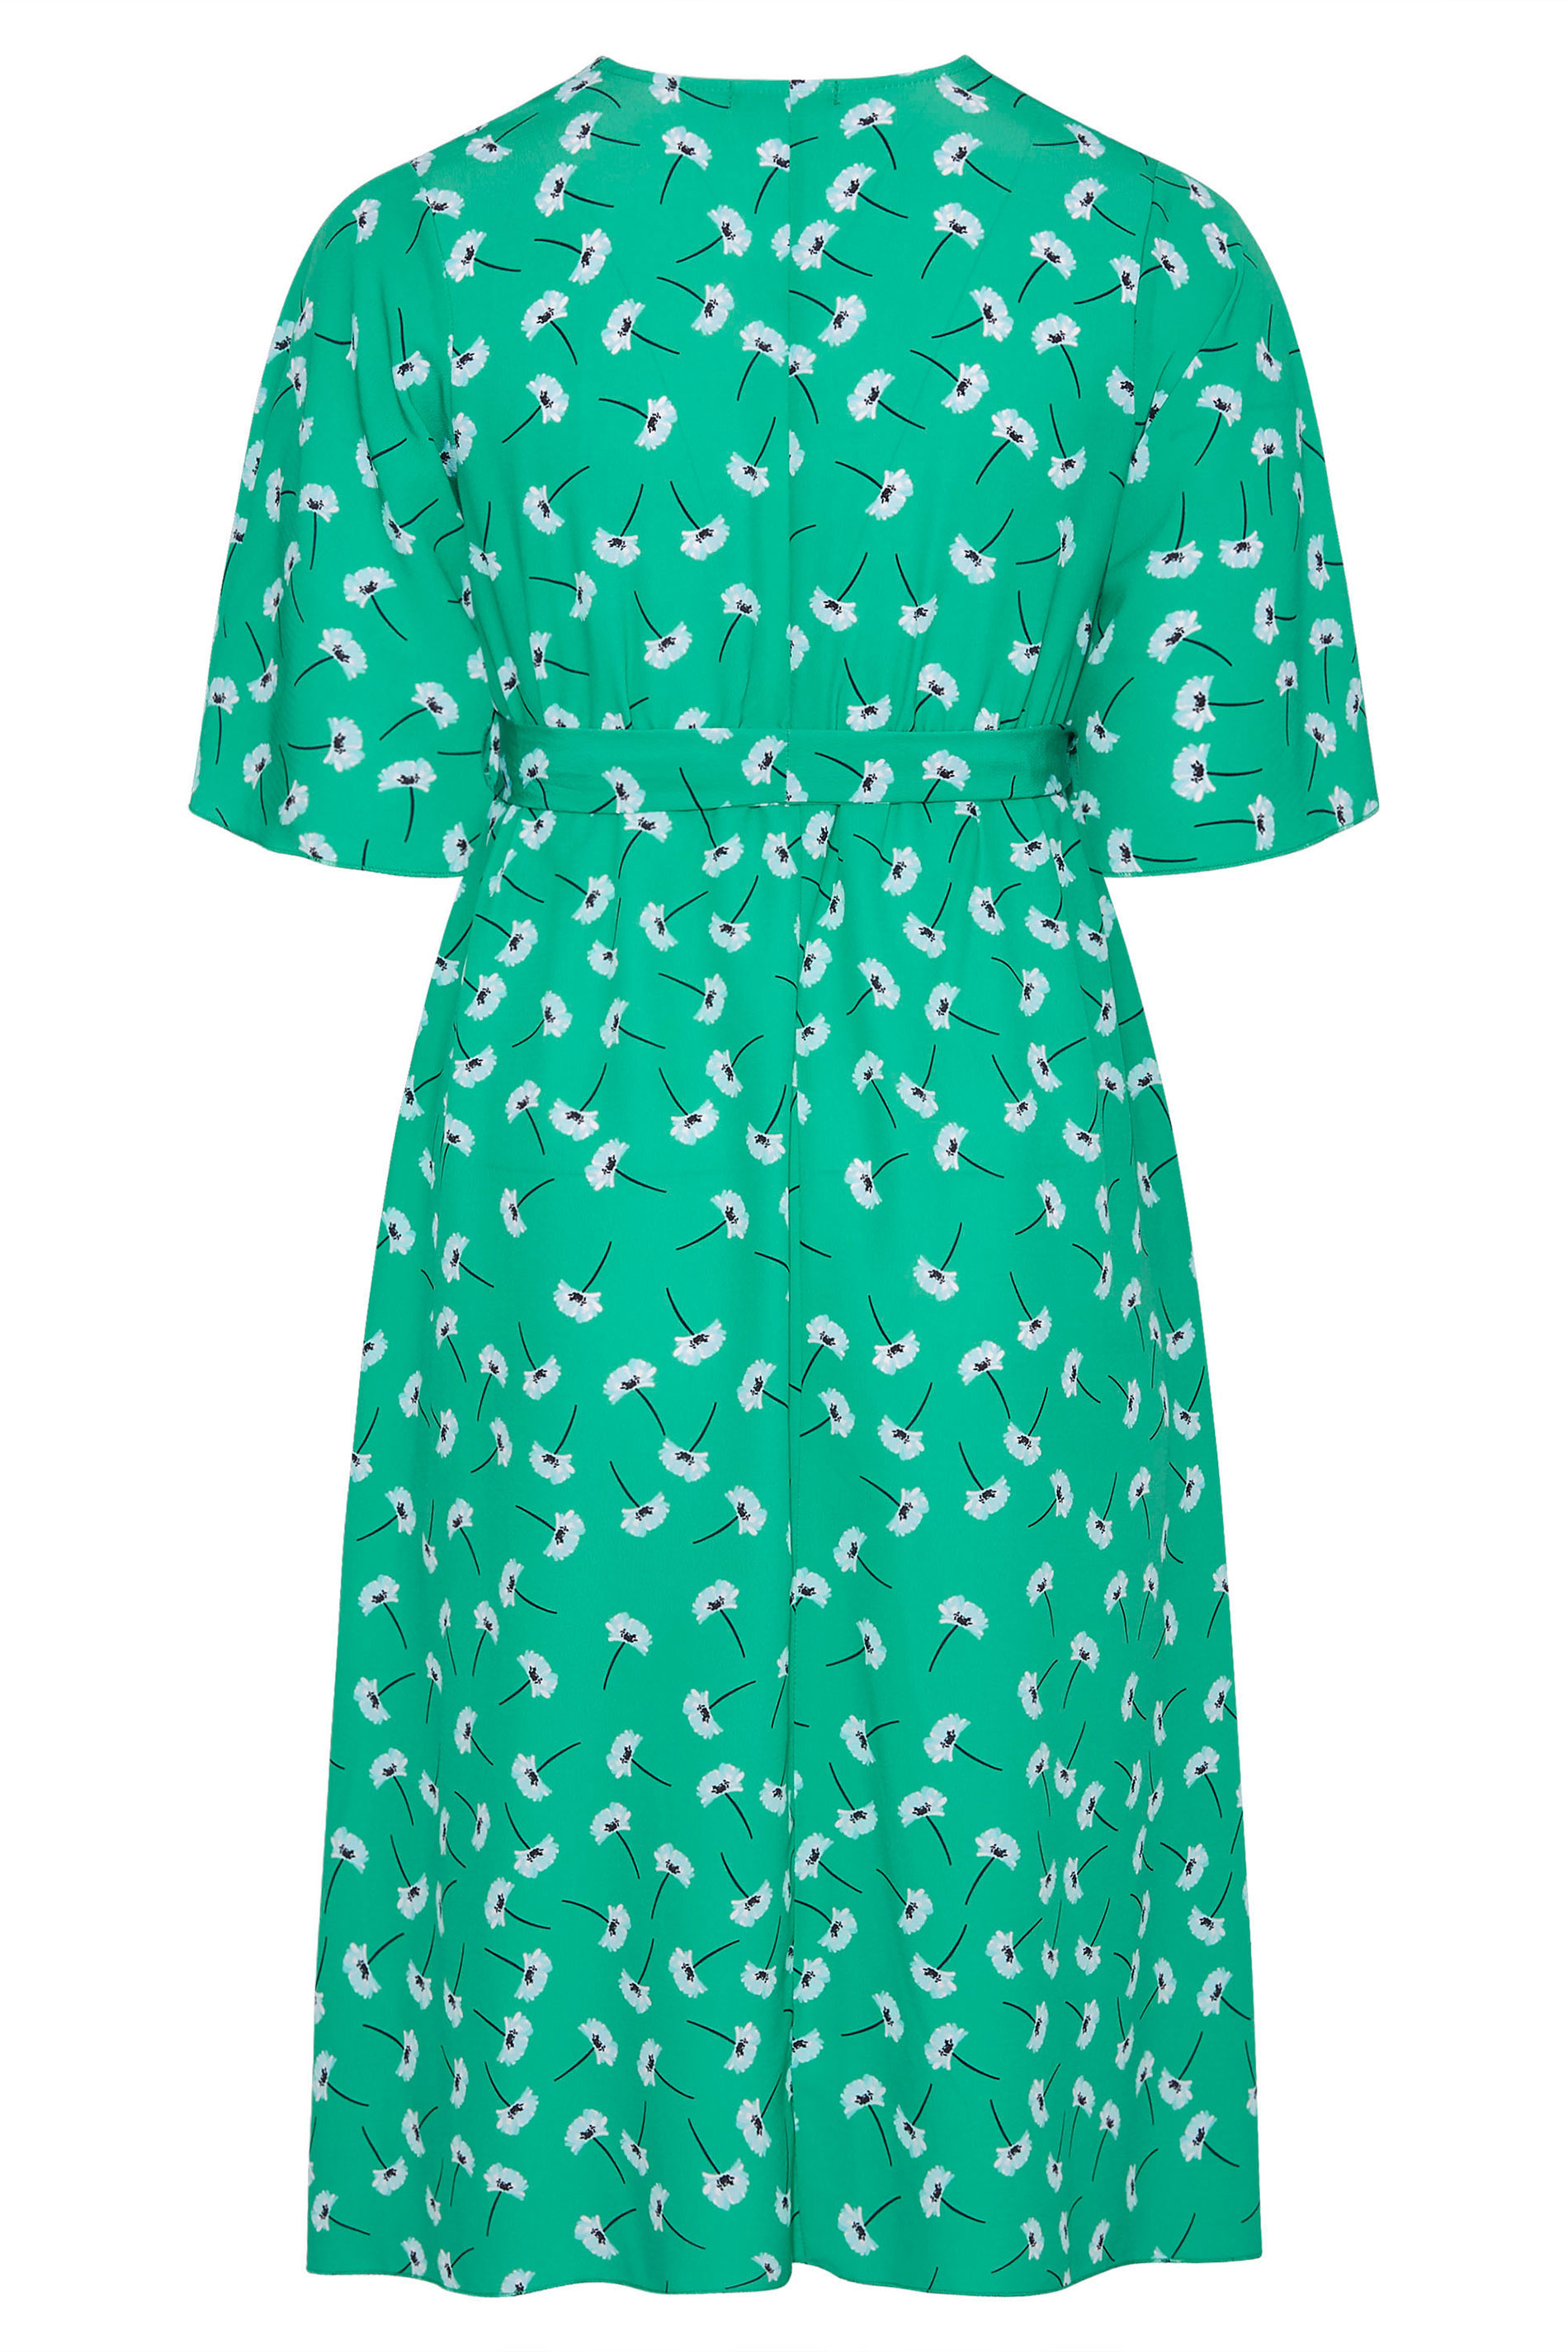 Robes Grande Taille Grande taille  Robes Portefeuilles | YOURS LONDON - Robe Verte Floral Style Portefeuille - NU44321